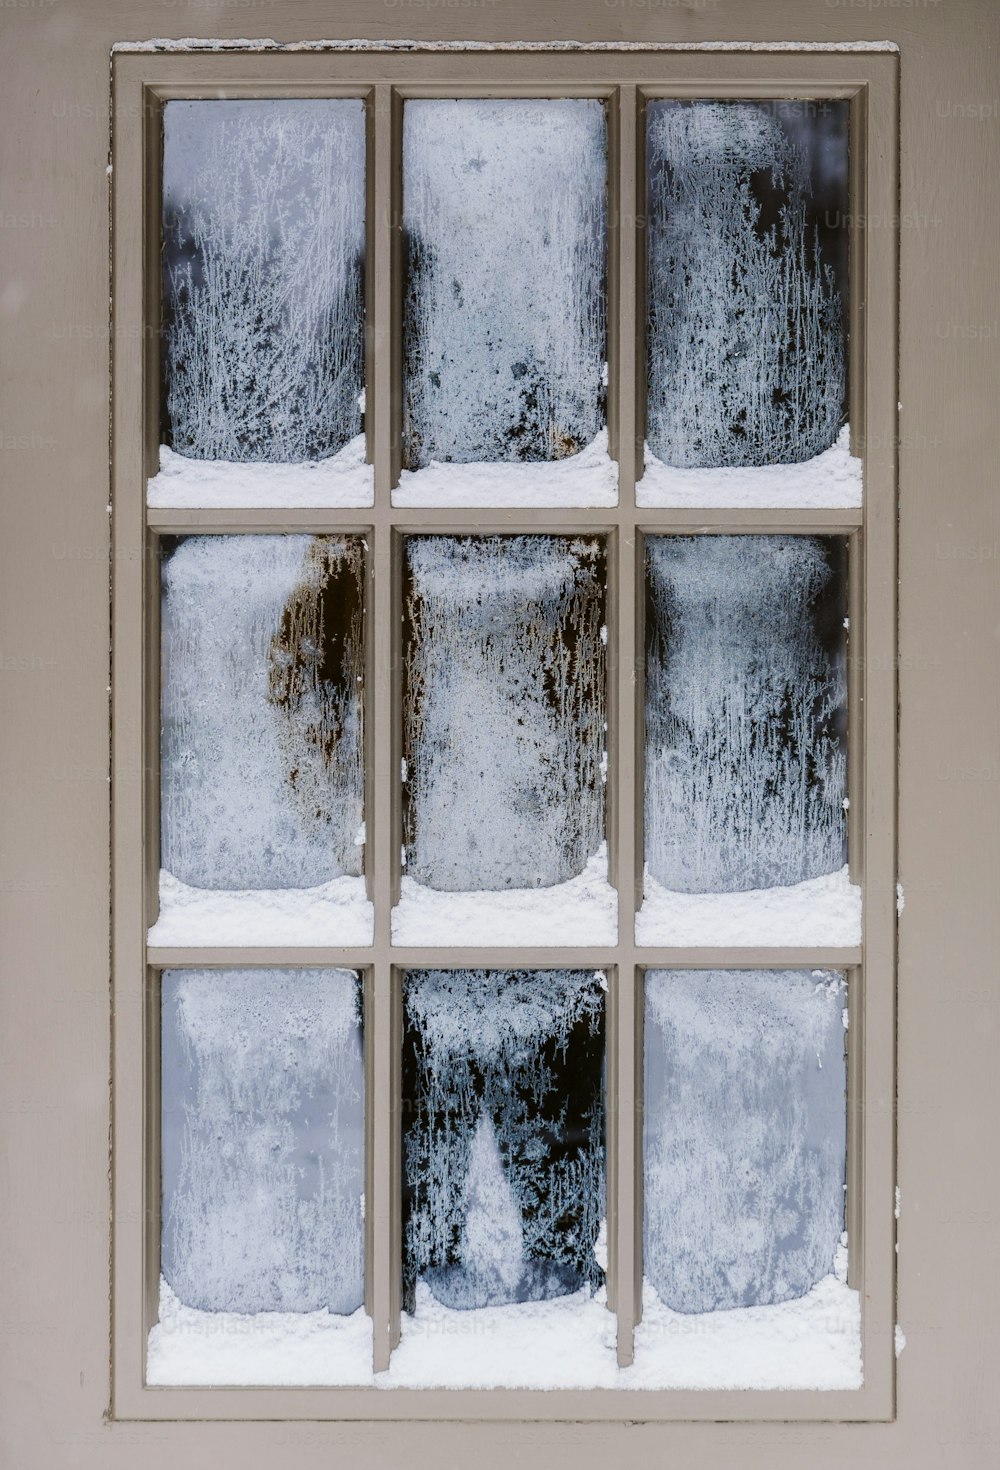 a window that has snow on the outside of it